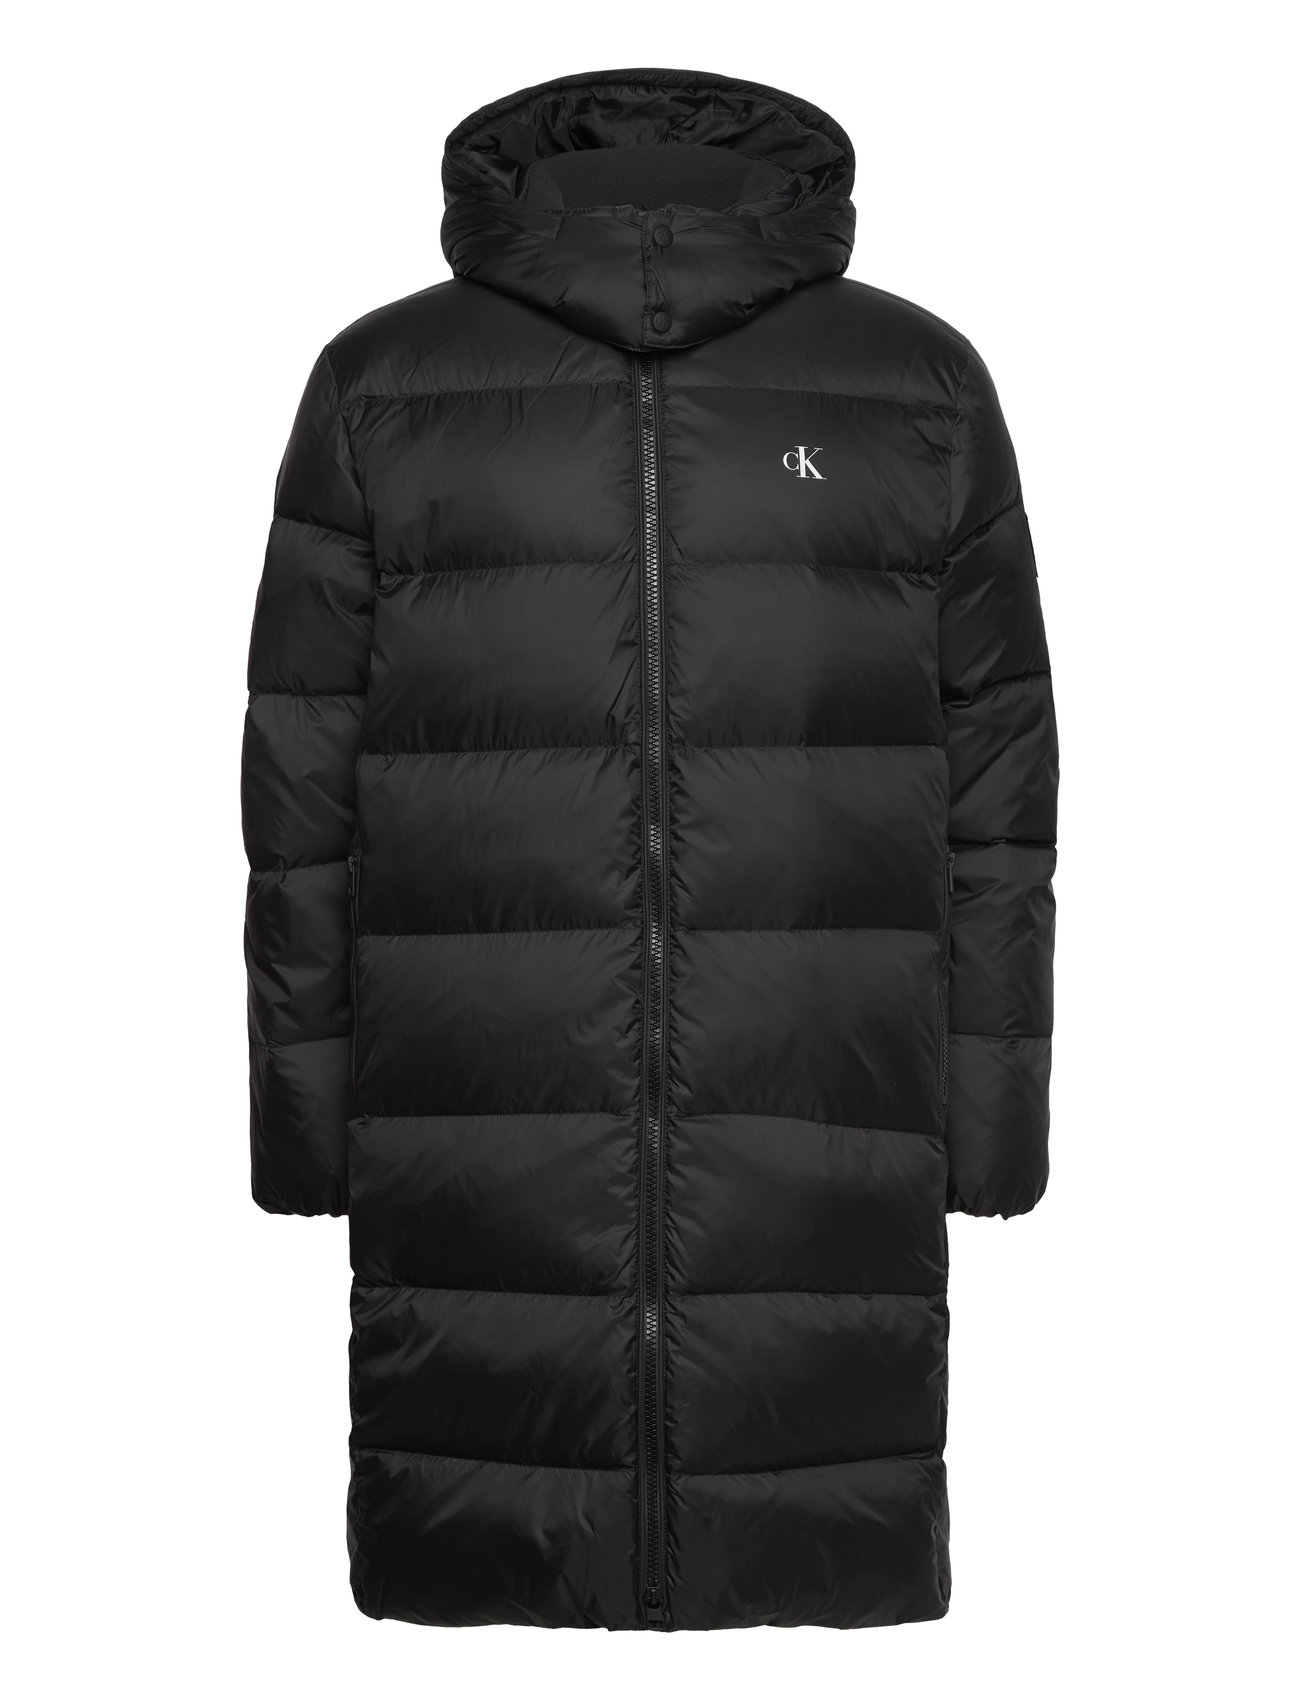 Calvin Klein Jeans Essentials Down Long Parka - 299.90 €. Buy Parkas from Calvin  Klein Jeans online at Boozt.com. Fast delivery and easy returns